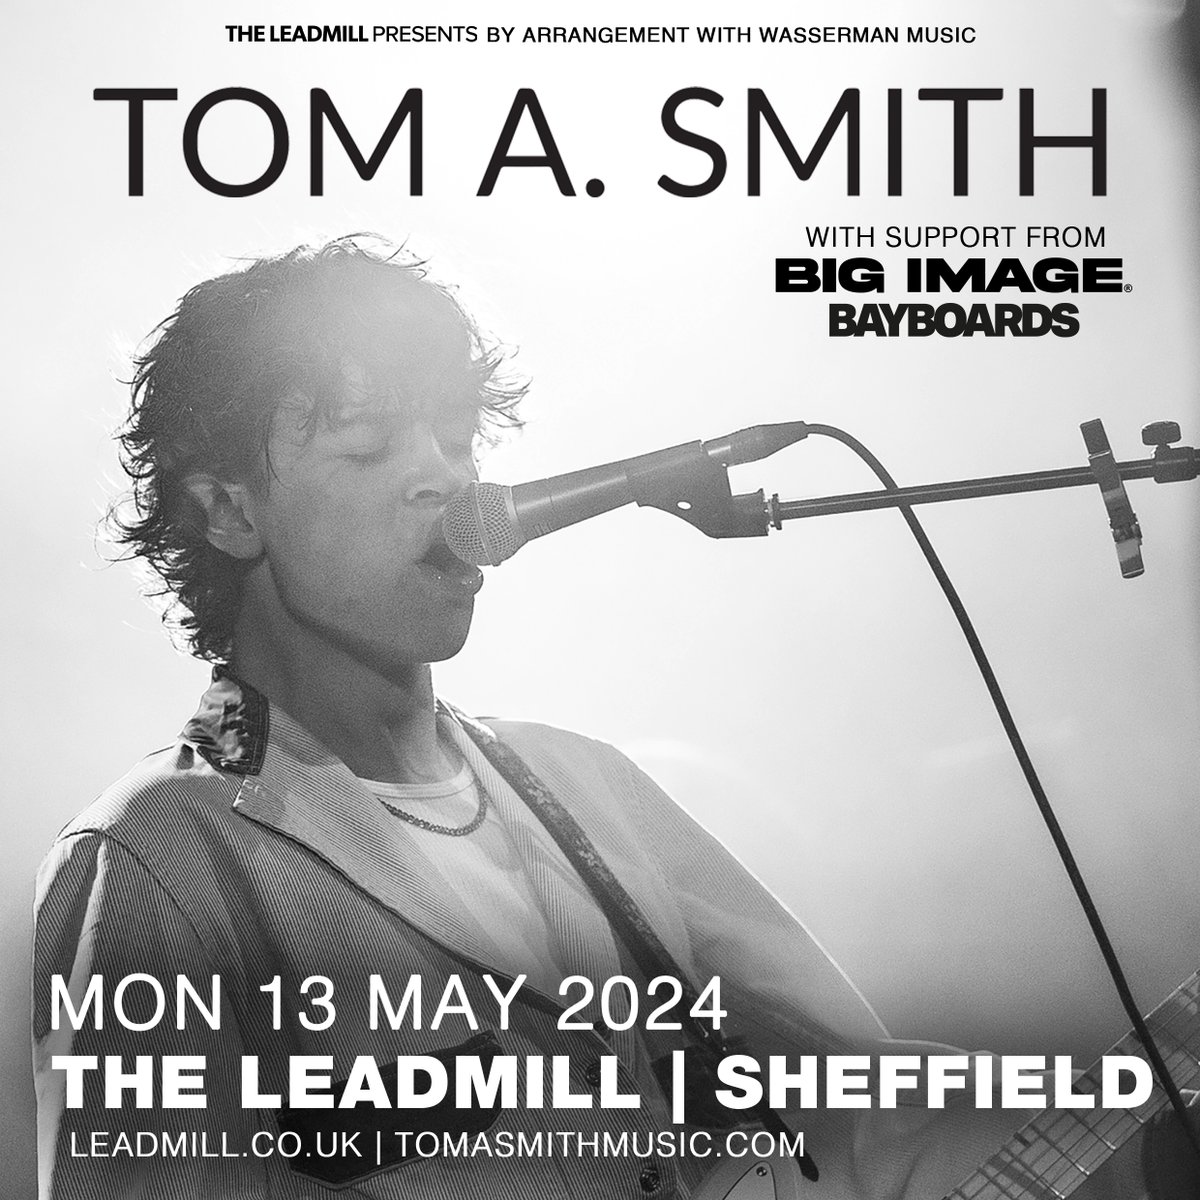 Not long left at all till this properly stacked lineup joins us on our Steel Stage 💃 @tomasmithmusic, @bigimage and @bayboardsuk come together to form a very exciting bill, tickets here > leadmill.co.uk/event/tom-a-sm…